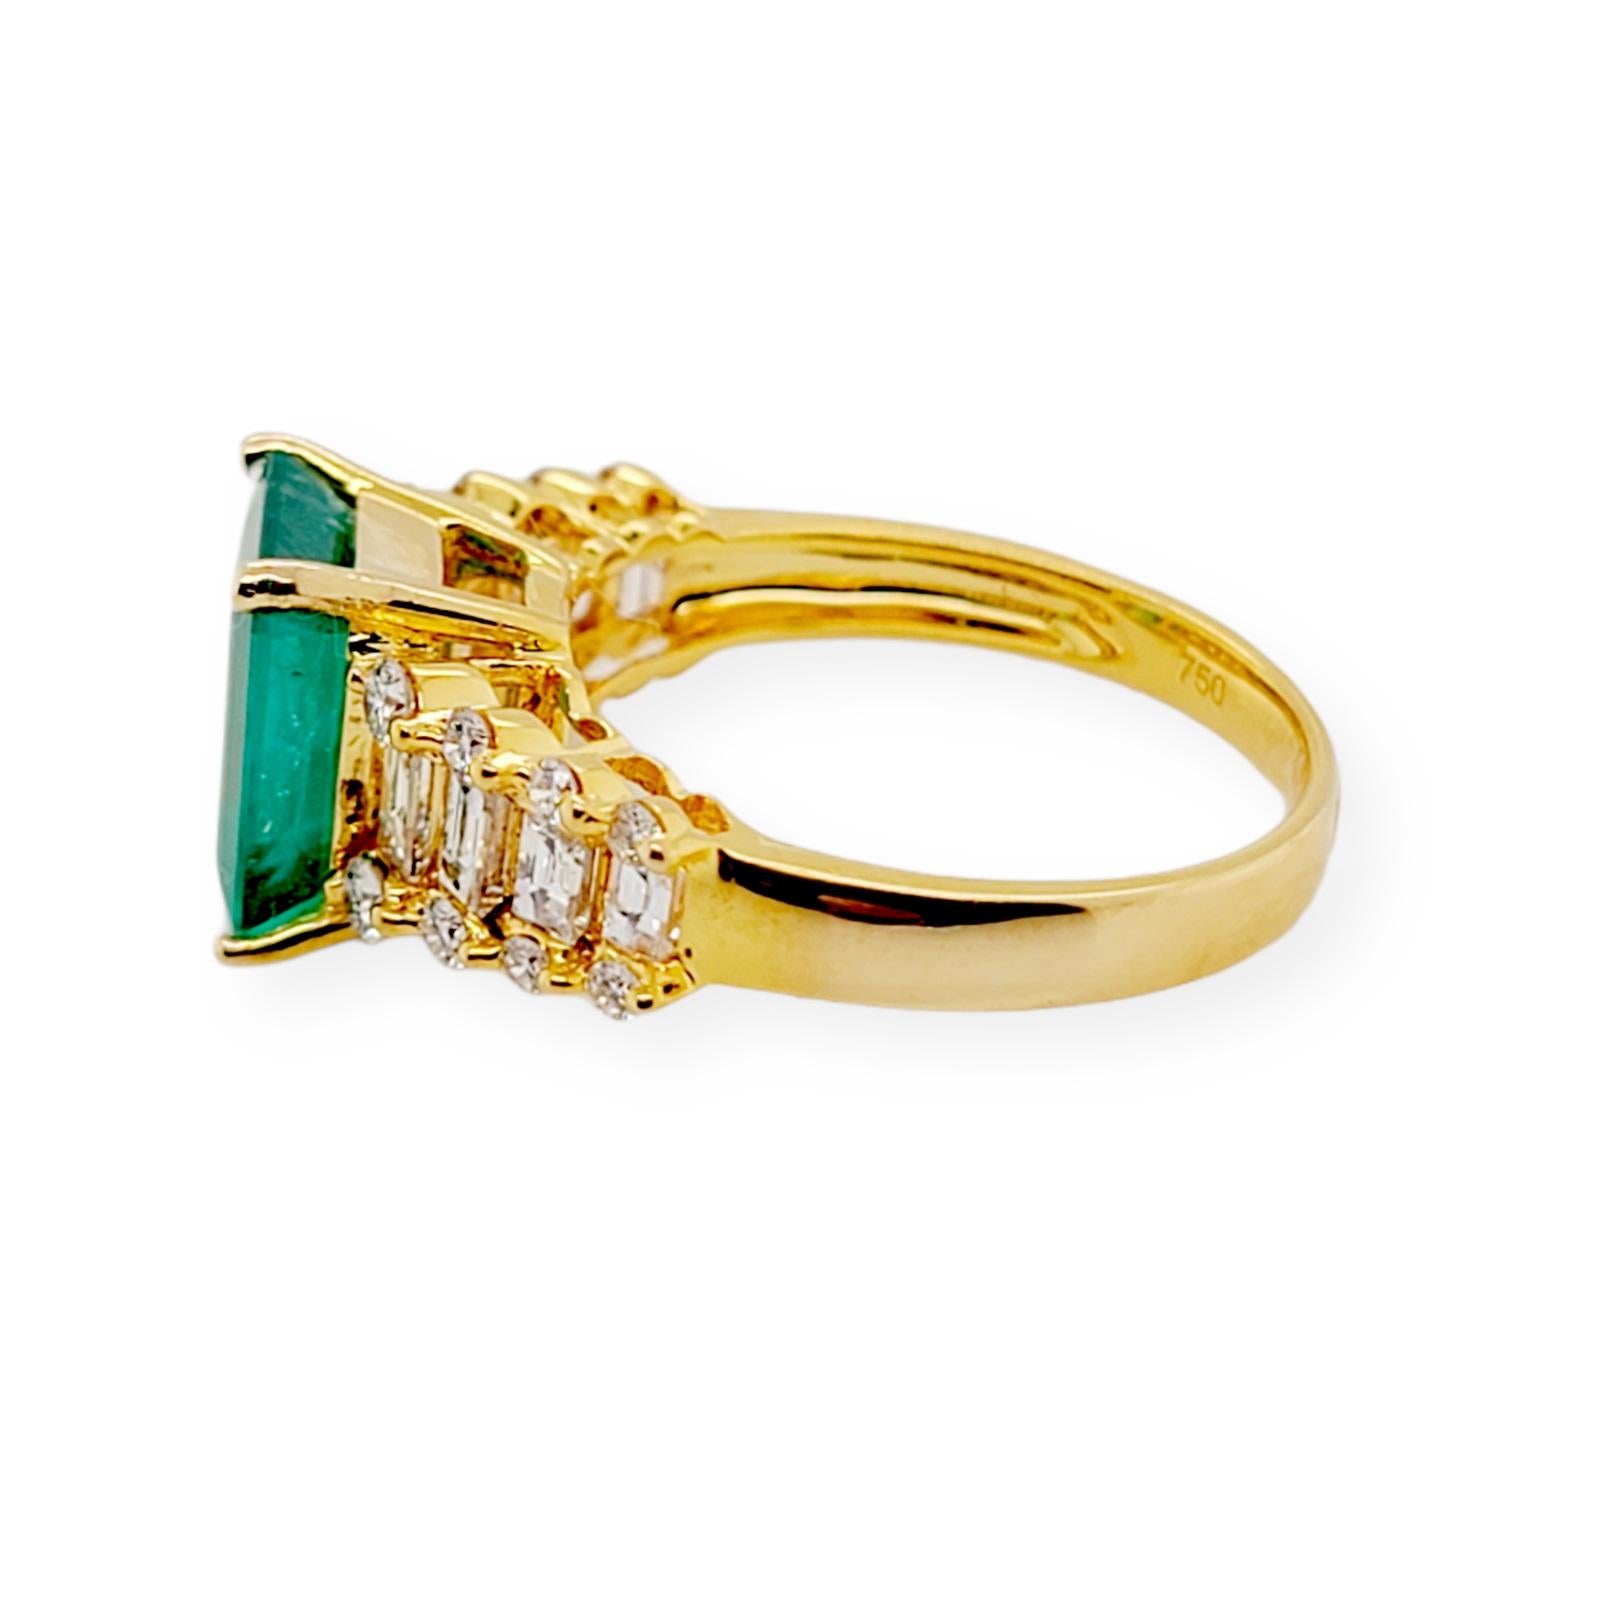 Round Cut 2.58 Ct Zambian Emerald & 1.03 Ct Diamonds in 18k Yellow Gold Engagement Ring For Sale